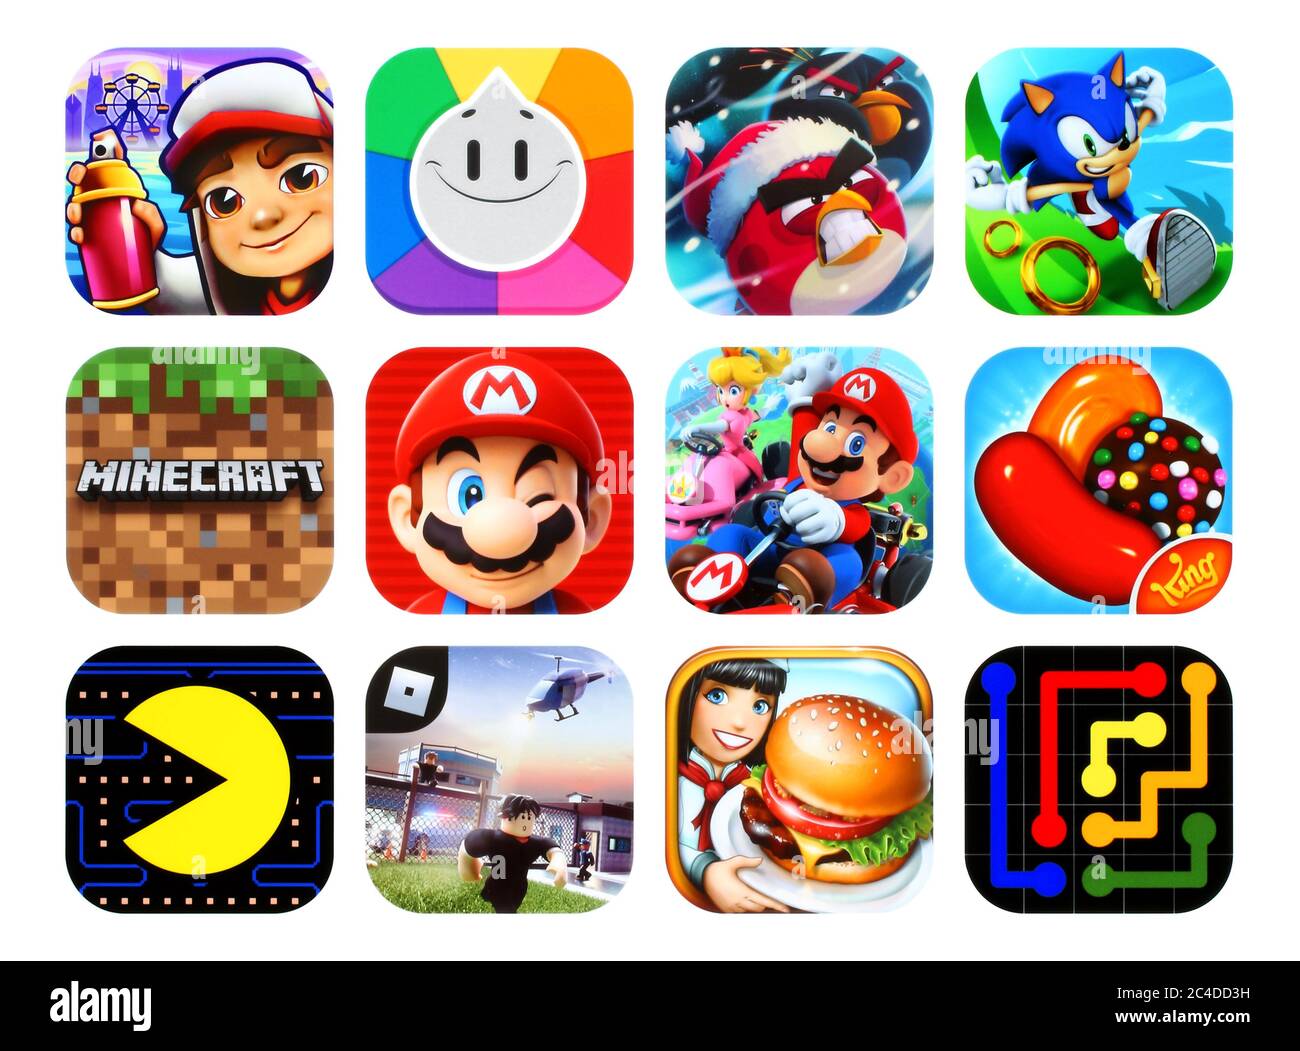 Top 25 Poki Games online: Subway Surfers, Candy Crush Saga, Angry Birds,  Super Mario and Sonic